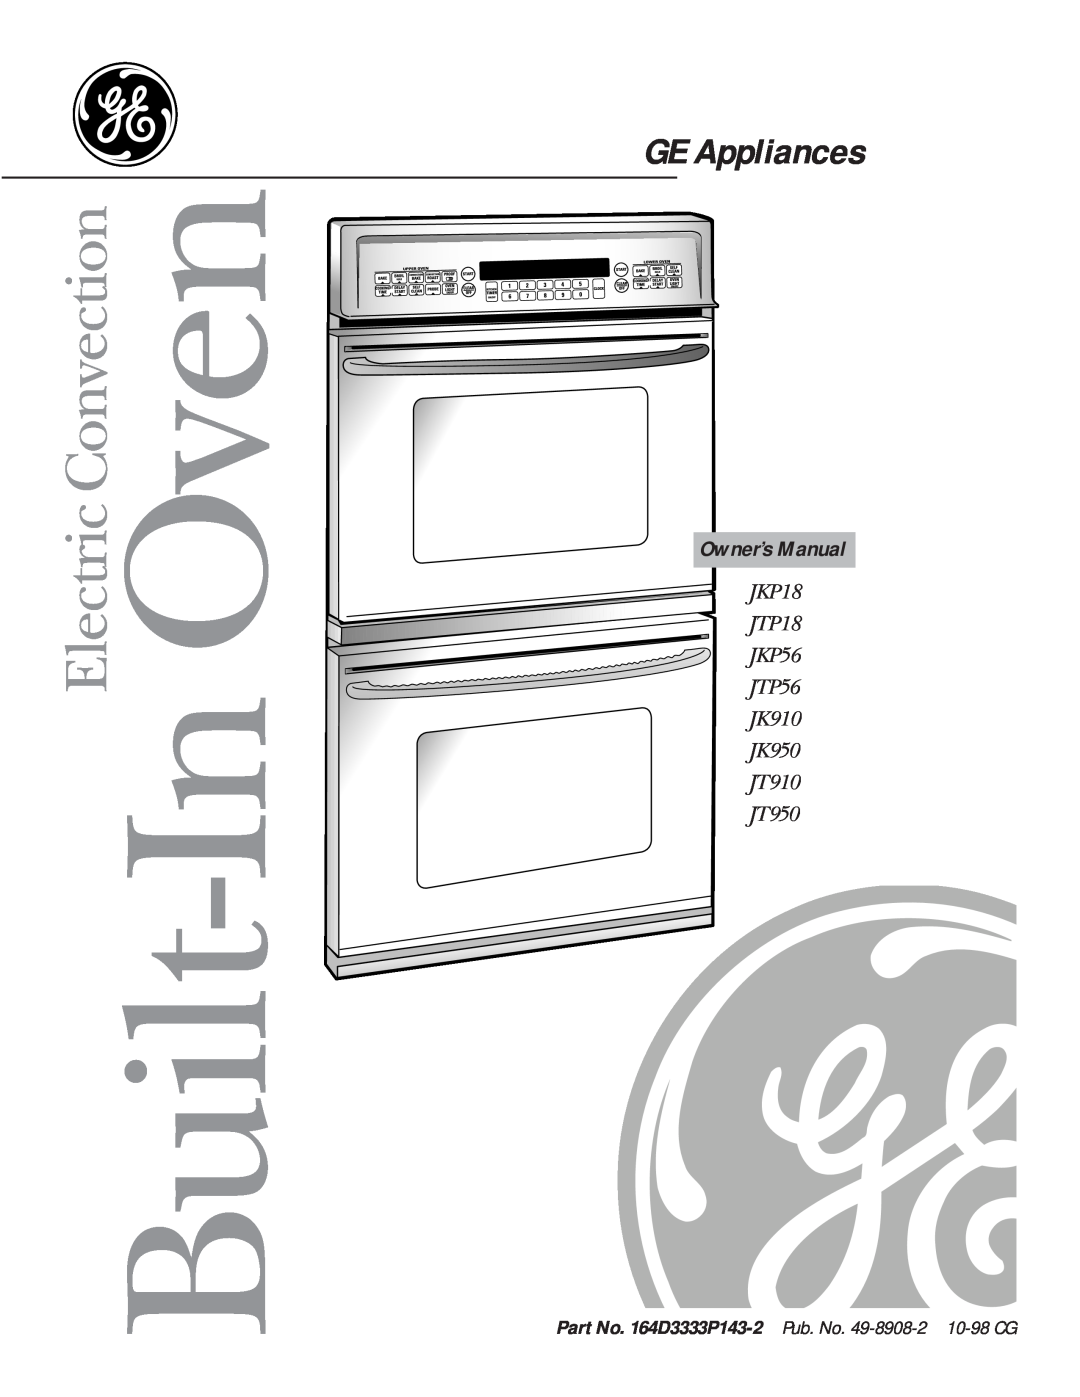 GE jt950 owner manual 164D4290P005 49-80034 7-00JR, Built-InOven, GE Appliances, Operating Instructions, Care and Cleaning 